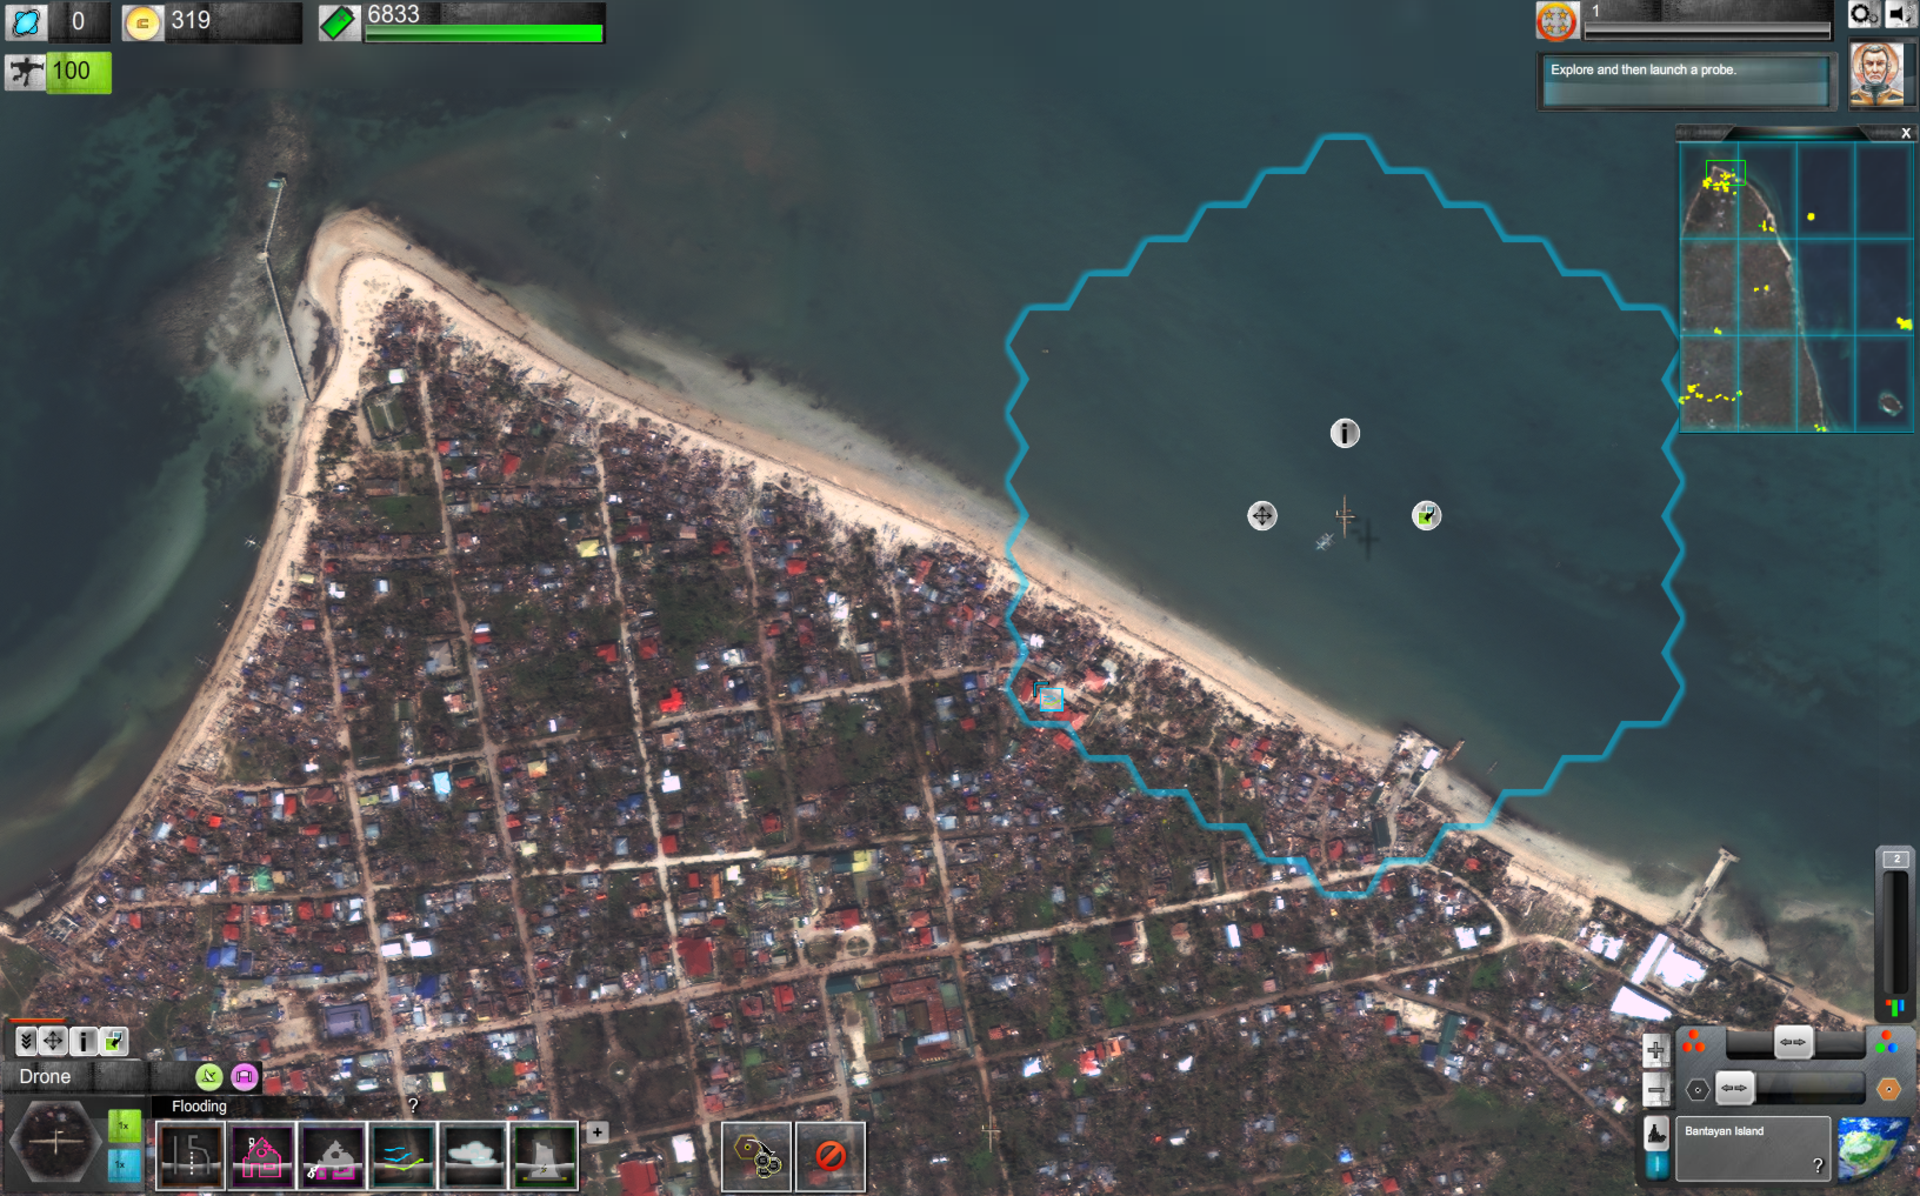 Typhoon Haiyan Philippines 2013: BlackShore's map helped relief support teams